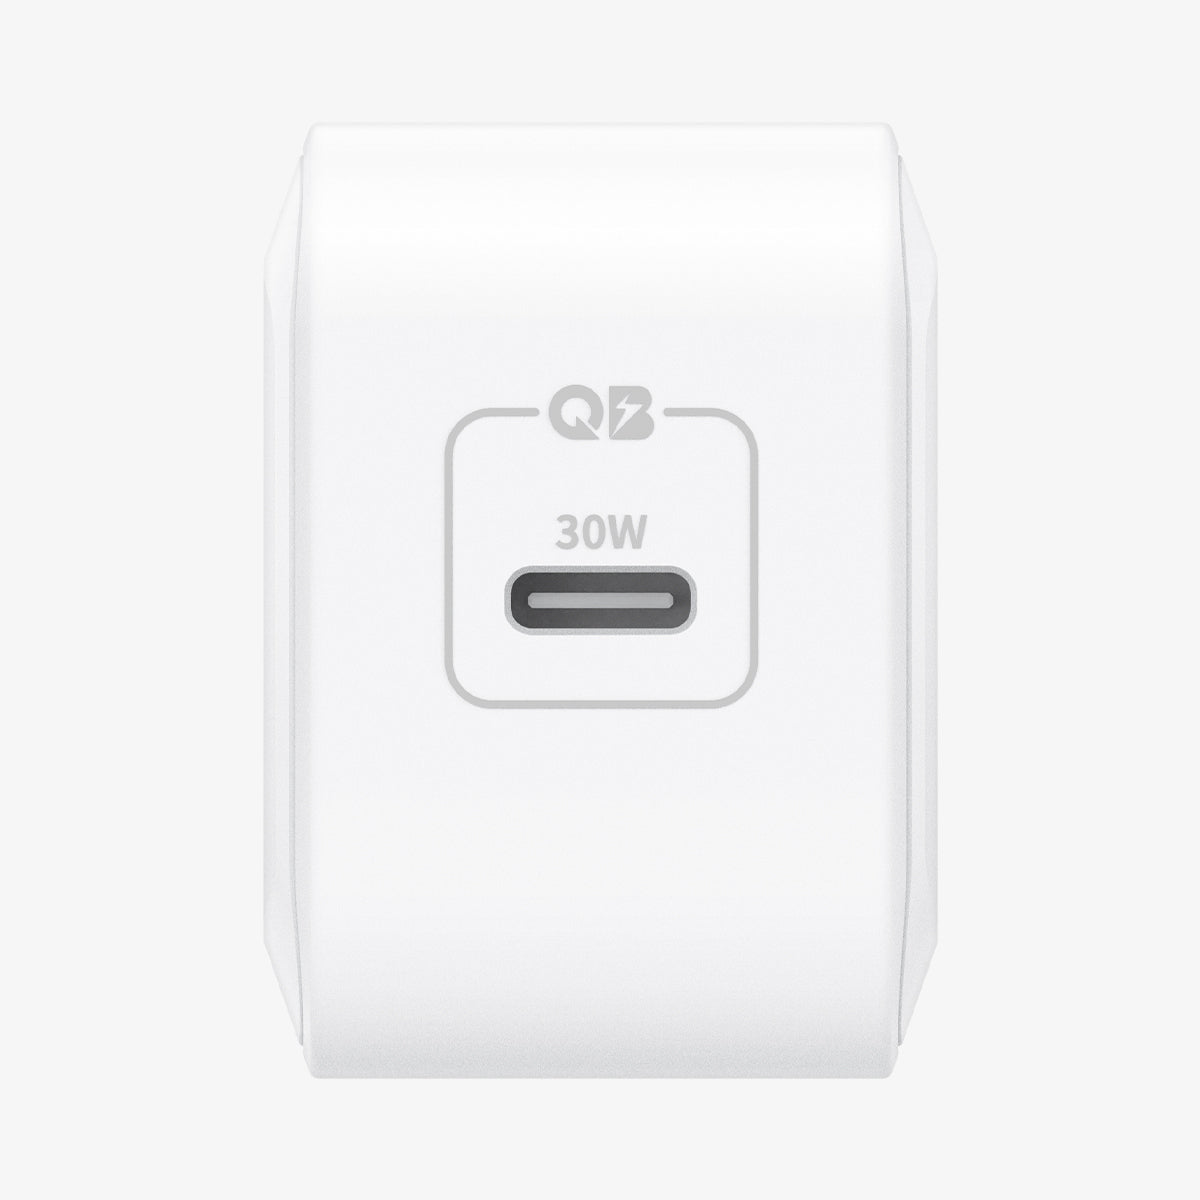 ACH02075 - ArcStation™ Pro 30W Wall Charger PE2008 in white showing the front with port